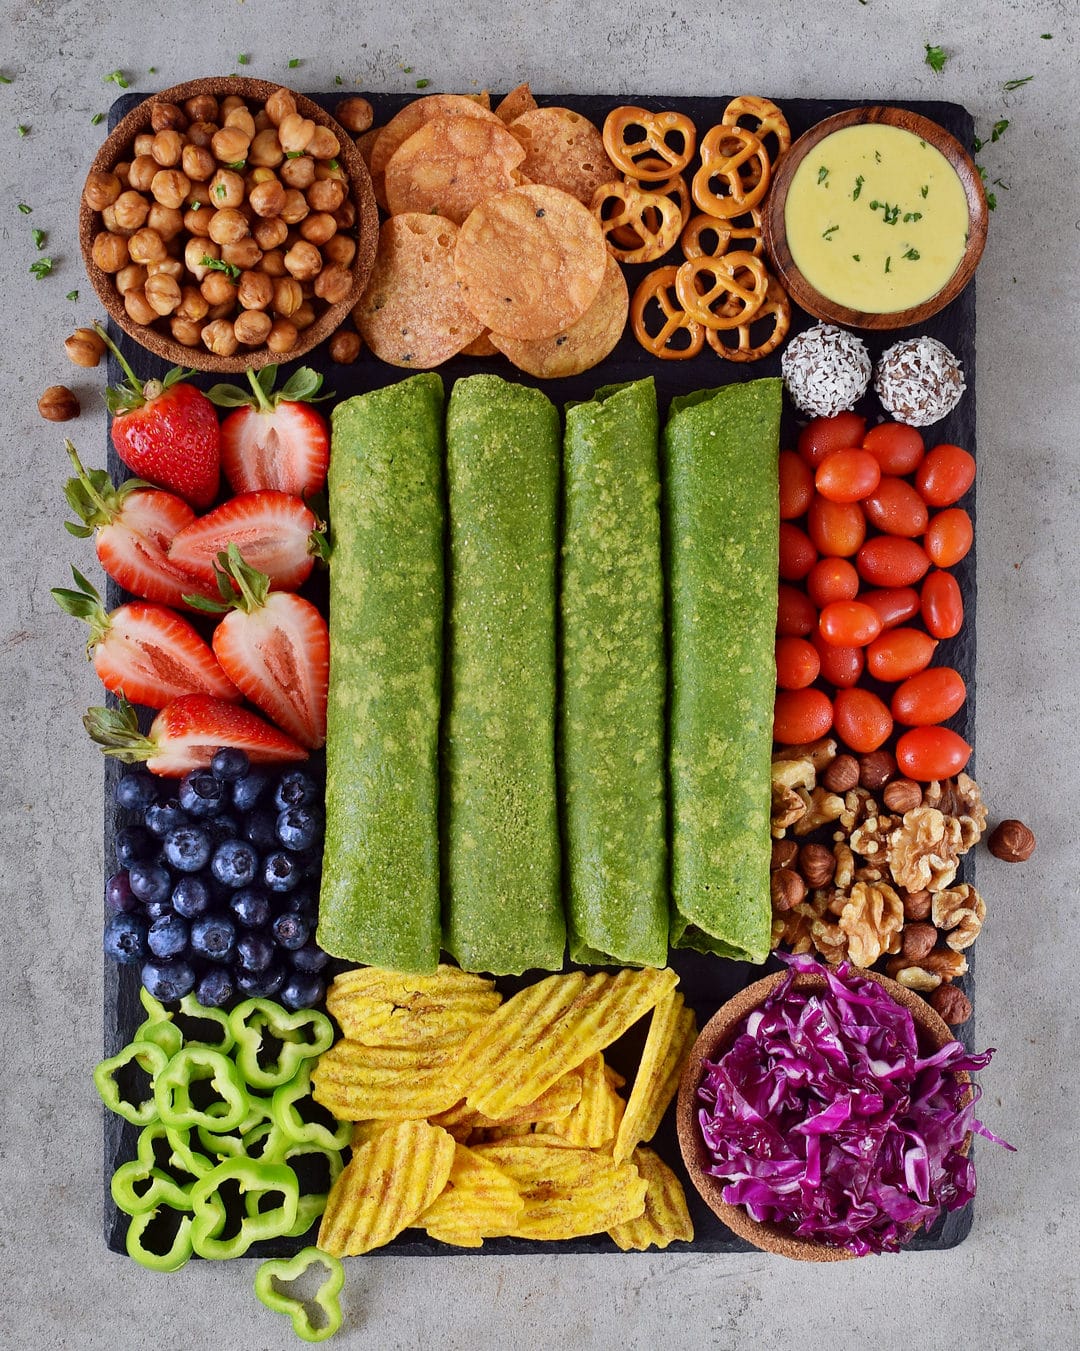 4 green spinach tortilla wraps on a snack platter with fruit, vegetables, nuts, and chips